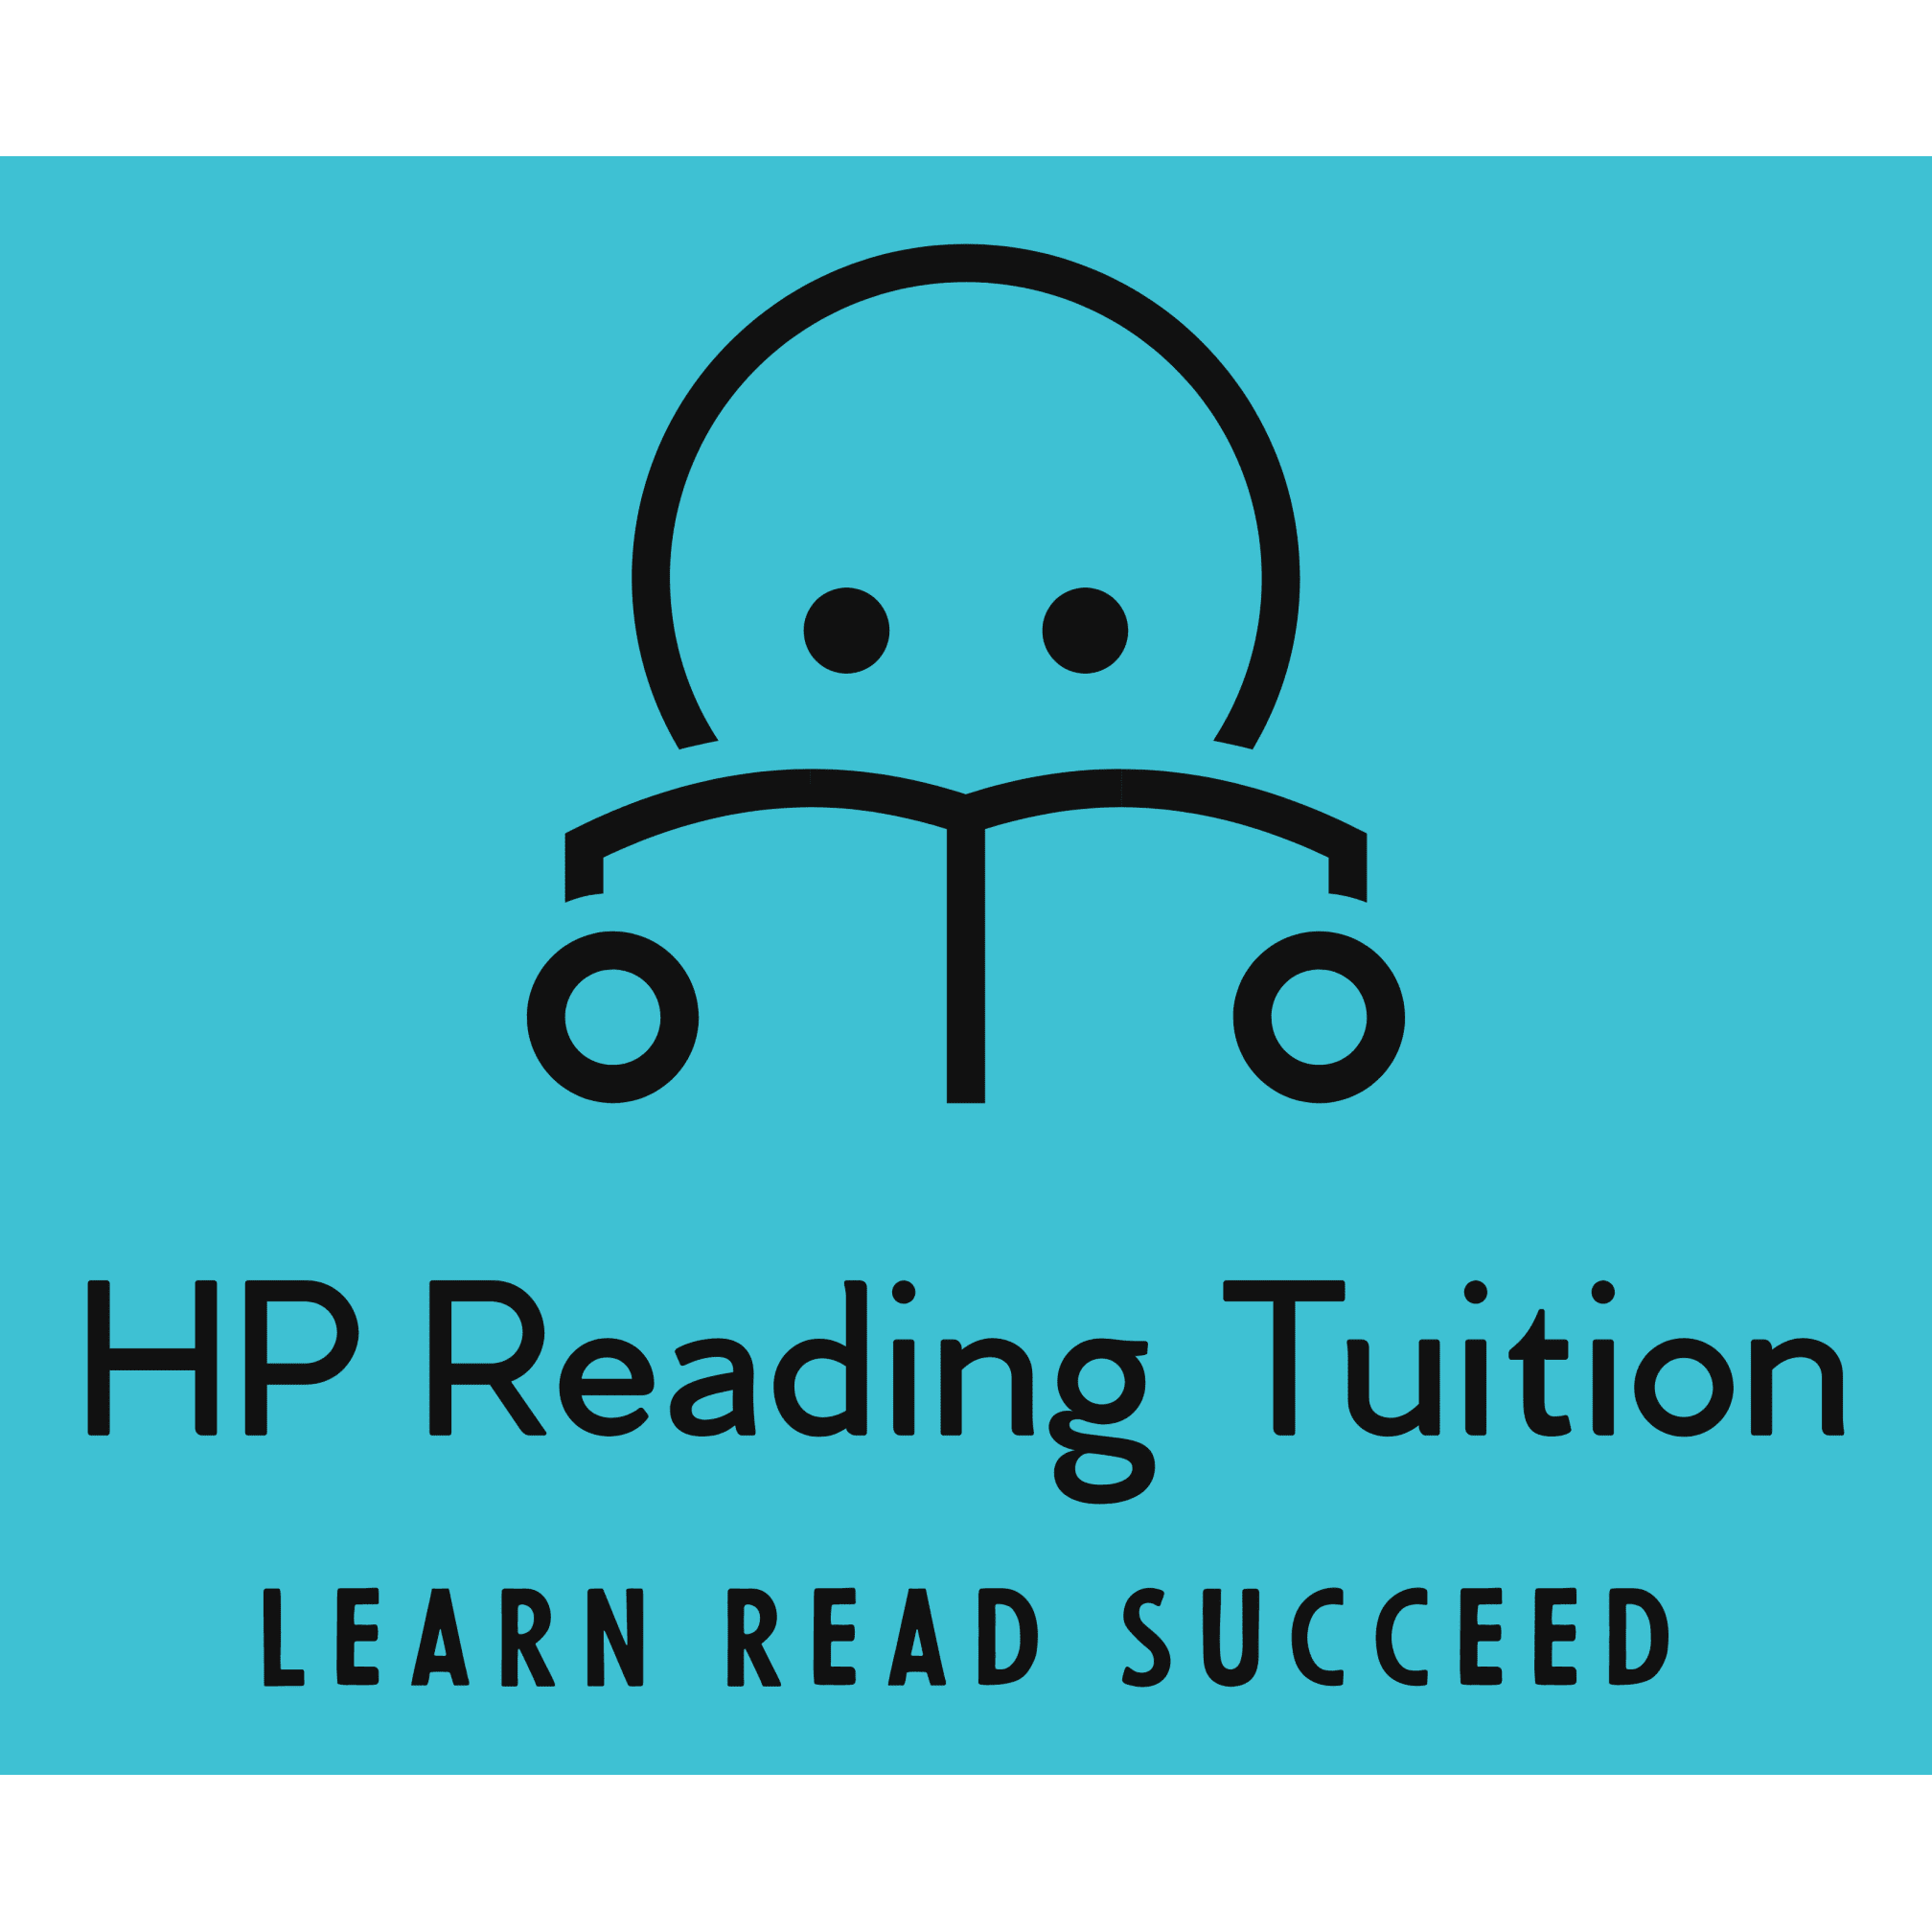 HP Reading Tuition - Huddersfield, West Yorkshire HD8 8TH - 07359 143450 | ShowMeLocal.com